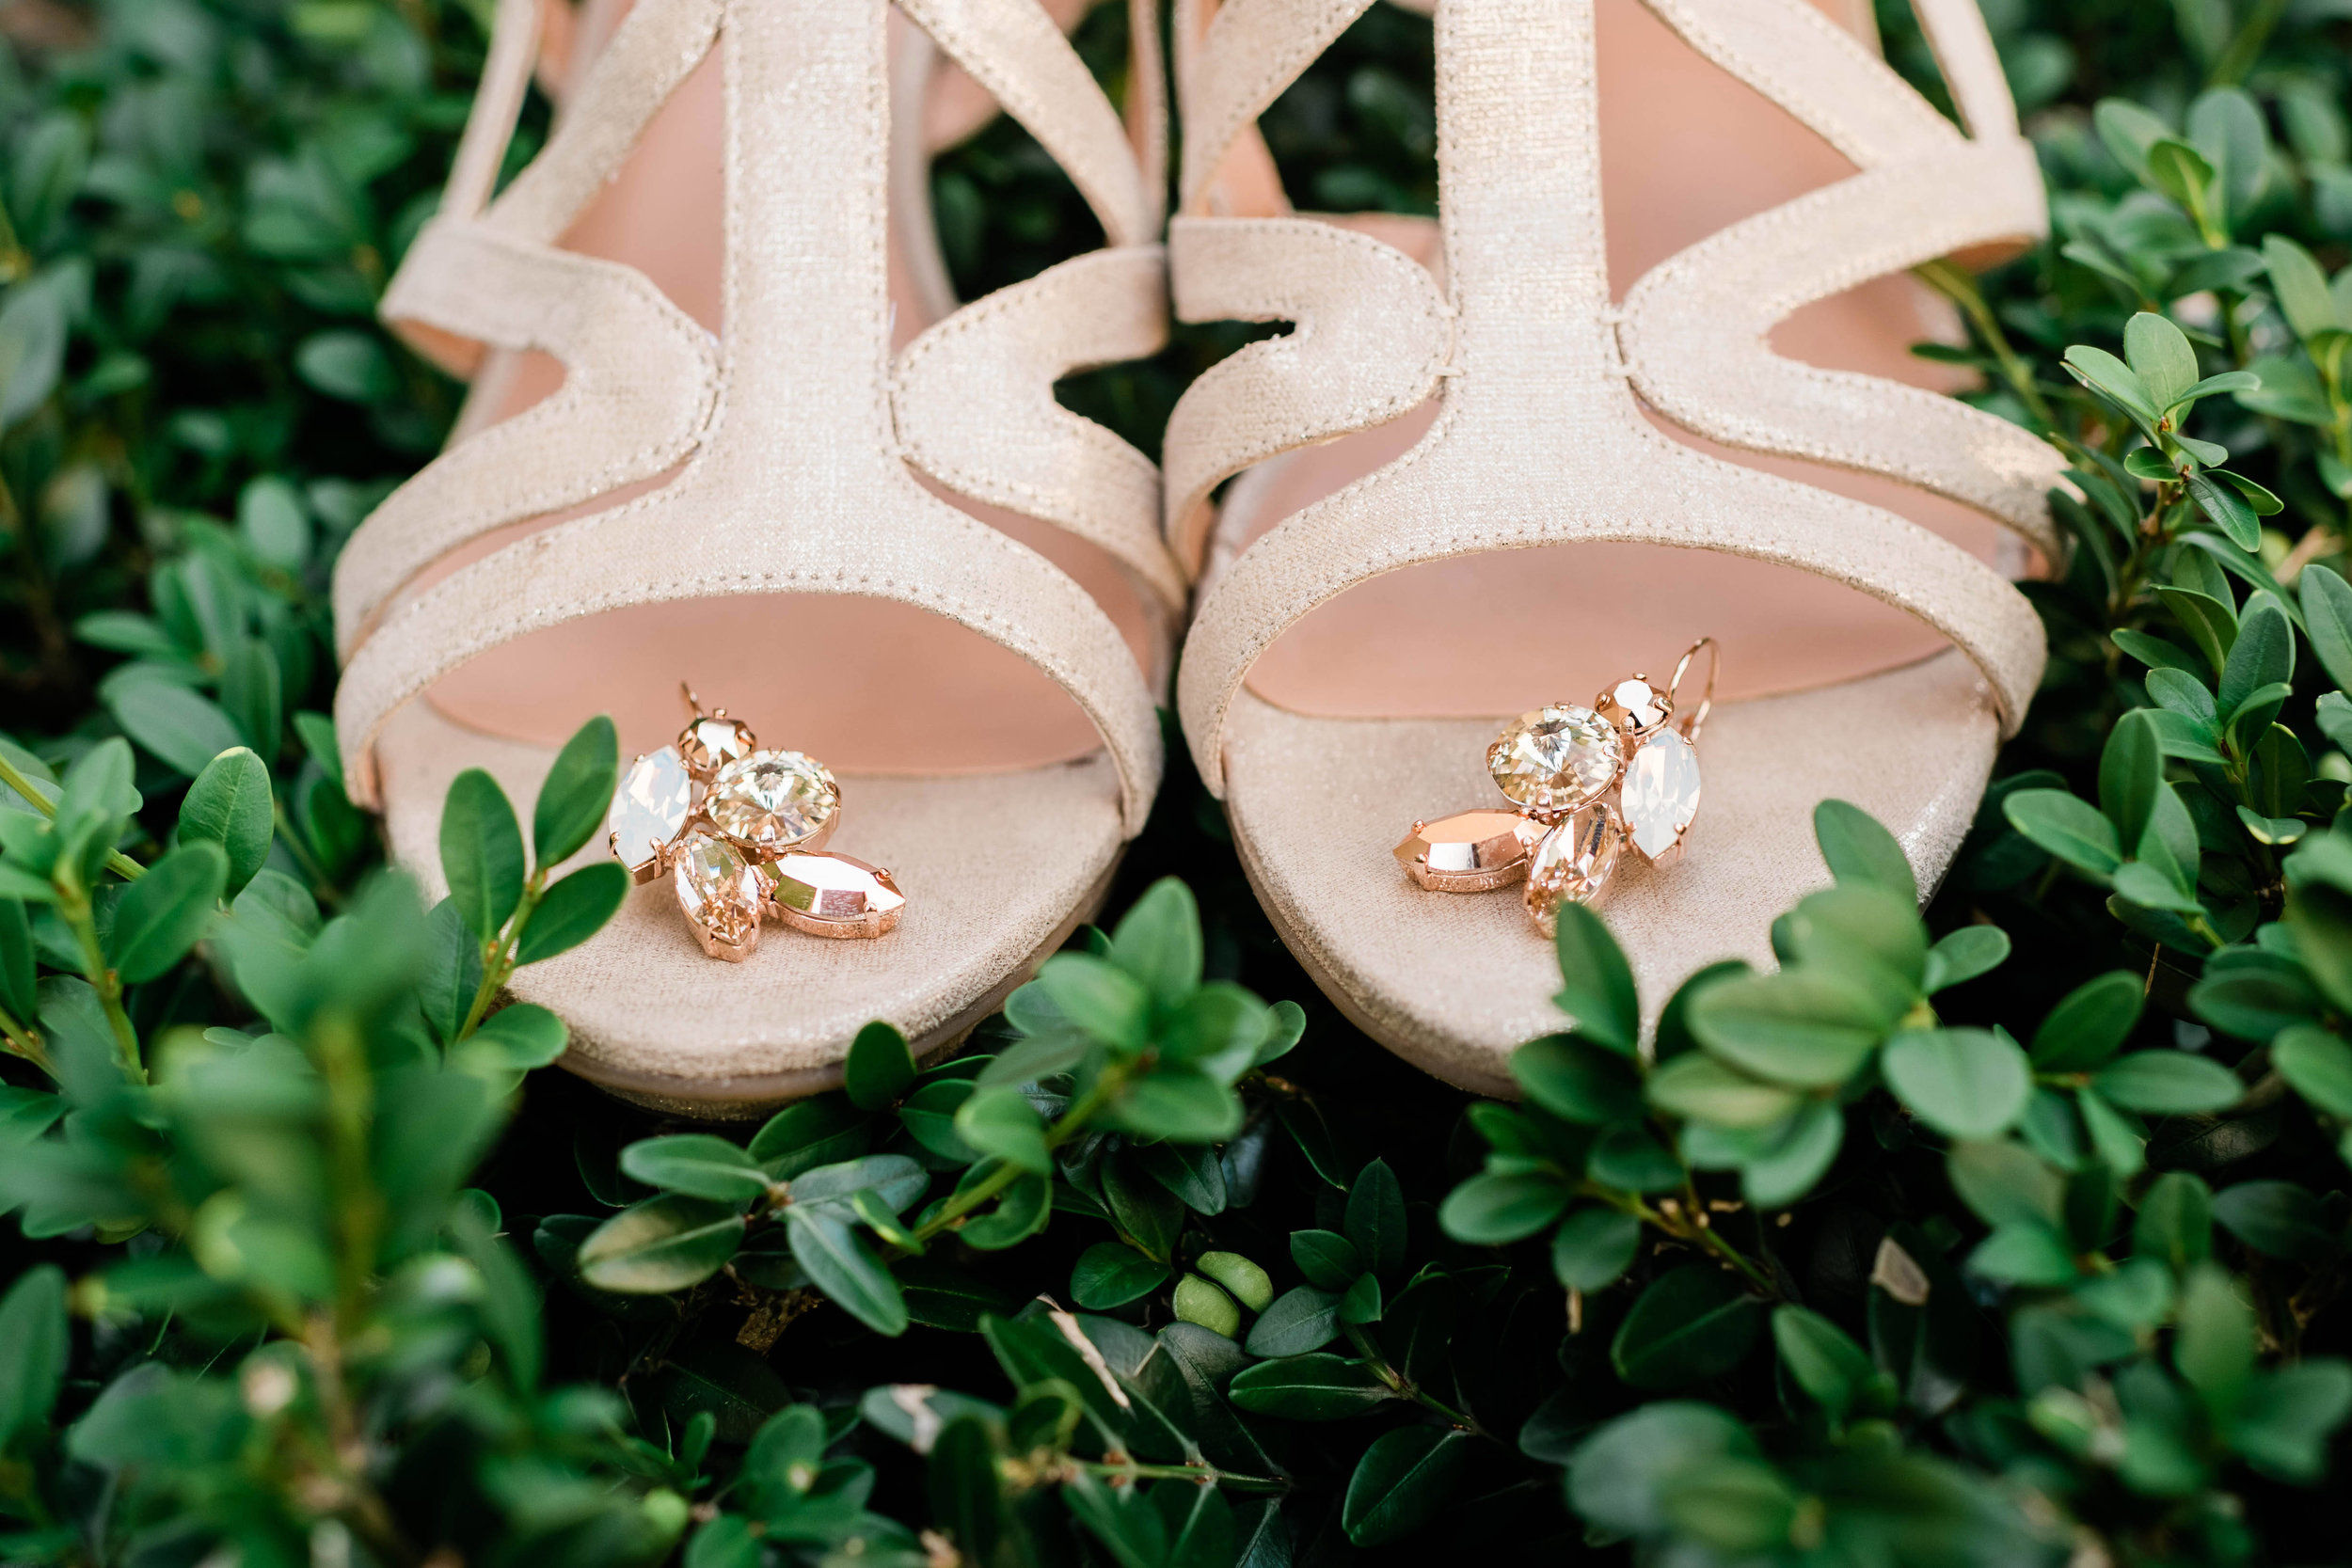 Bride's earrings on her shoes